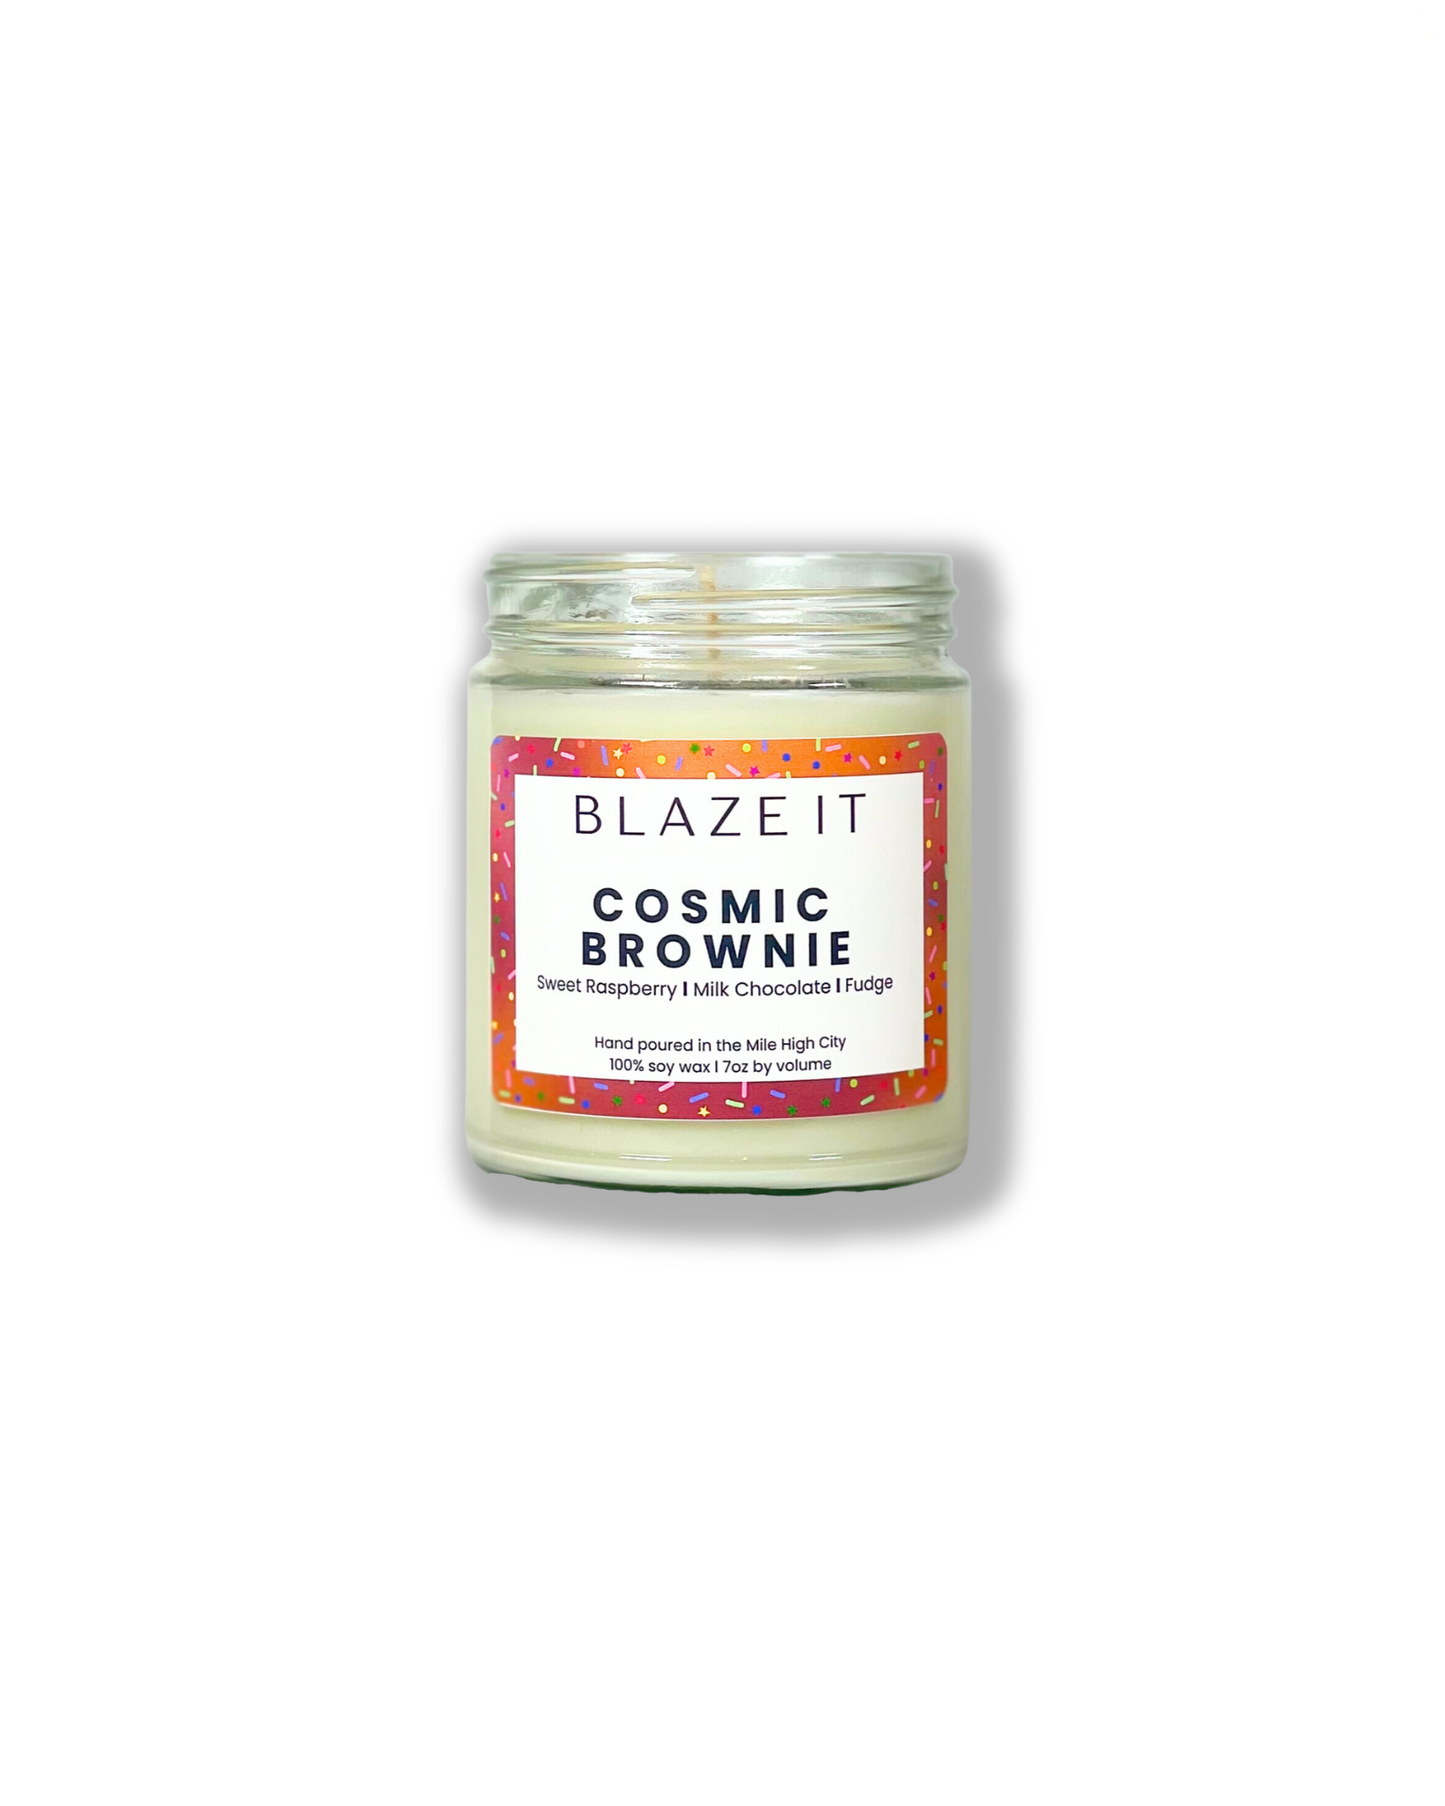 Cosmic Brownie candle - Blaze it Candle co